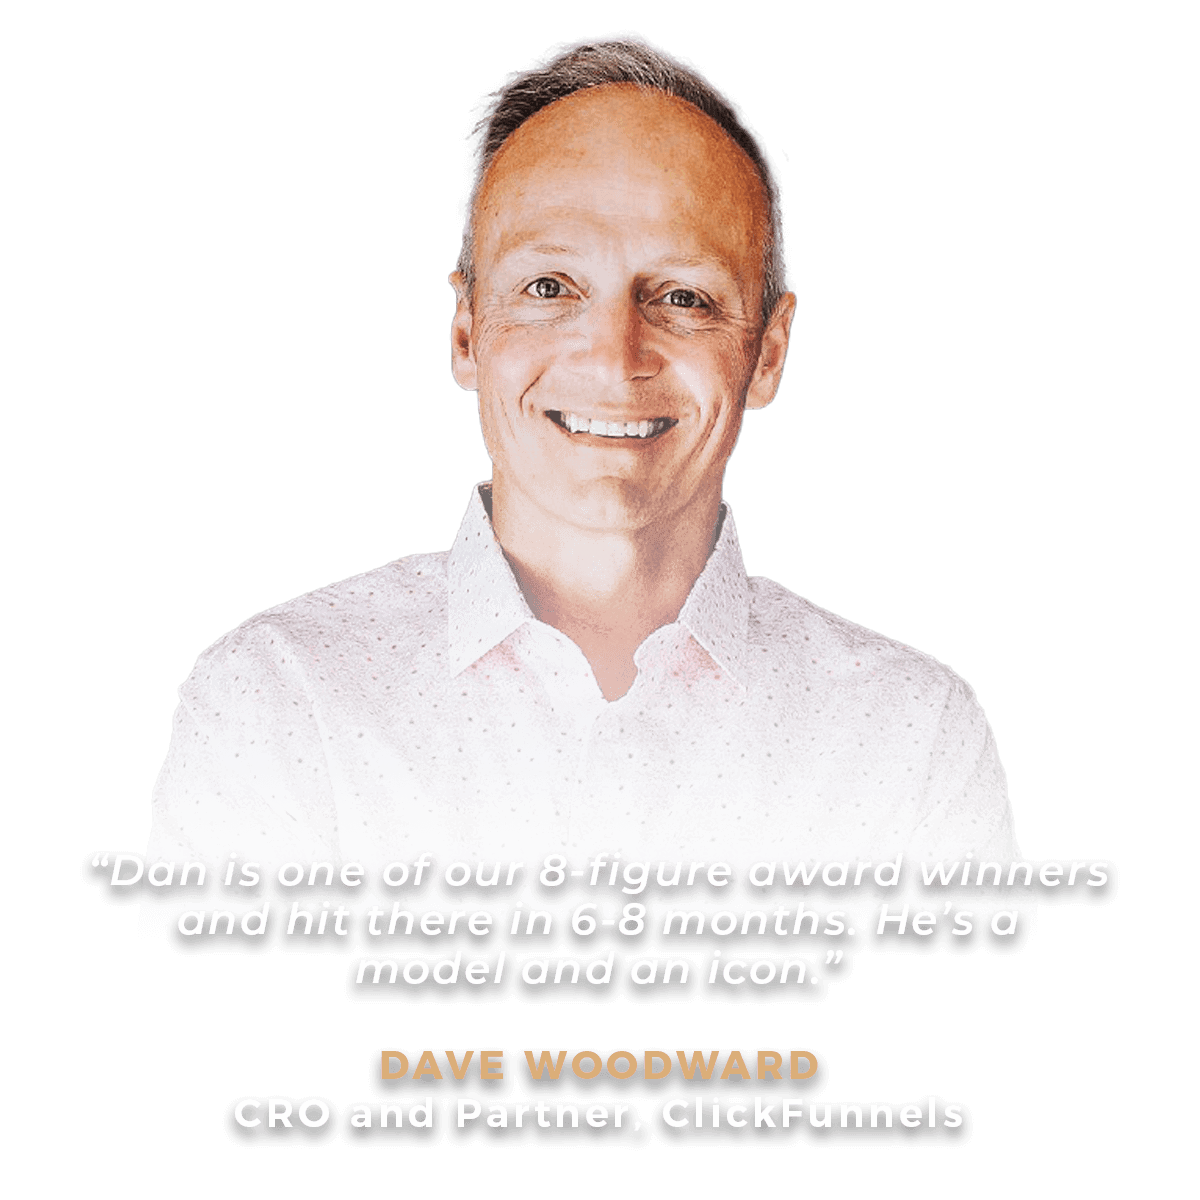 SMART_Famous-people-testimonials_DaveWoodward.png